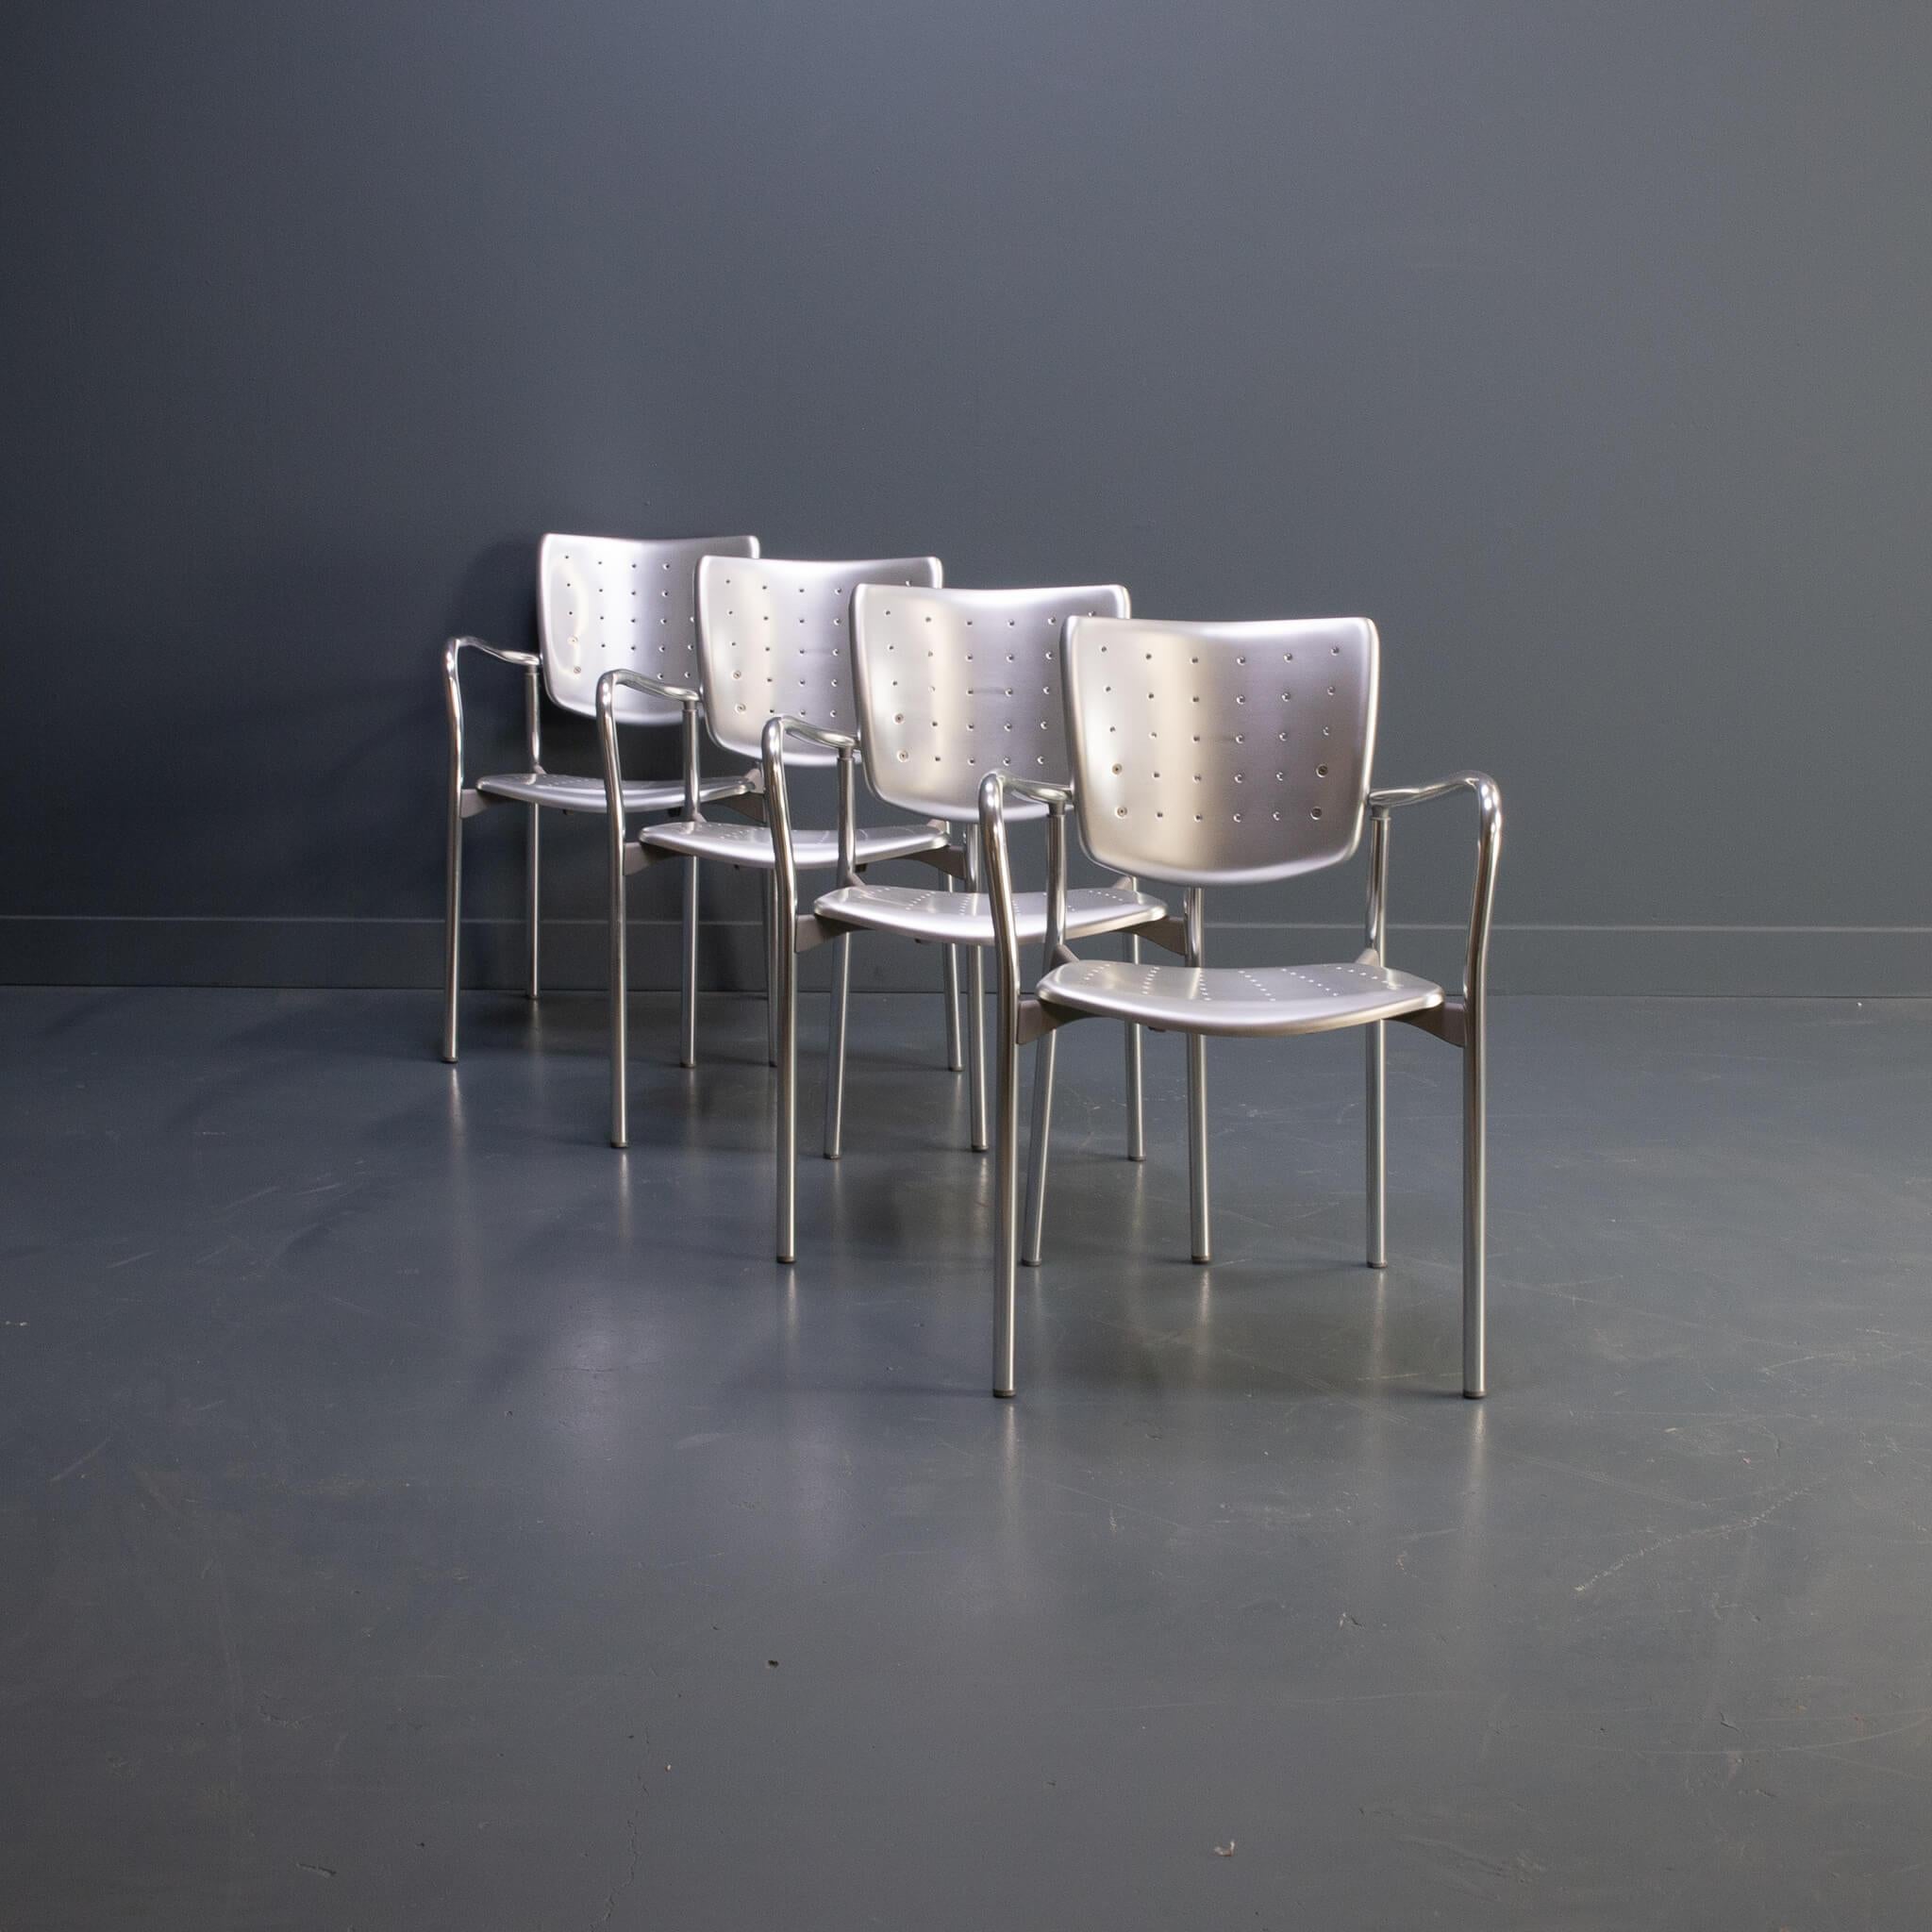 Amat Street Silver Chair is an all-round design chair with beautiful lined armrests. The Street Silver chair has a tubular frame made of polished aluminum. Seat and back are made of stamped aluminum and held together by injected polymer supports.